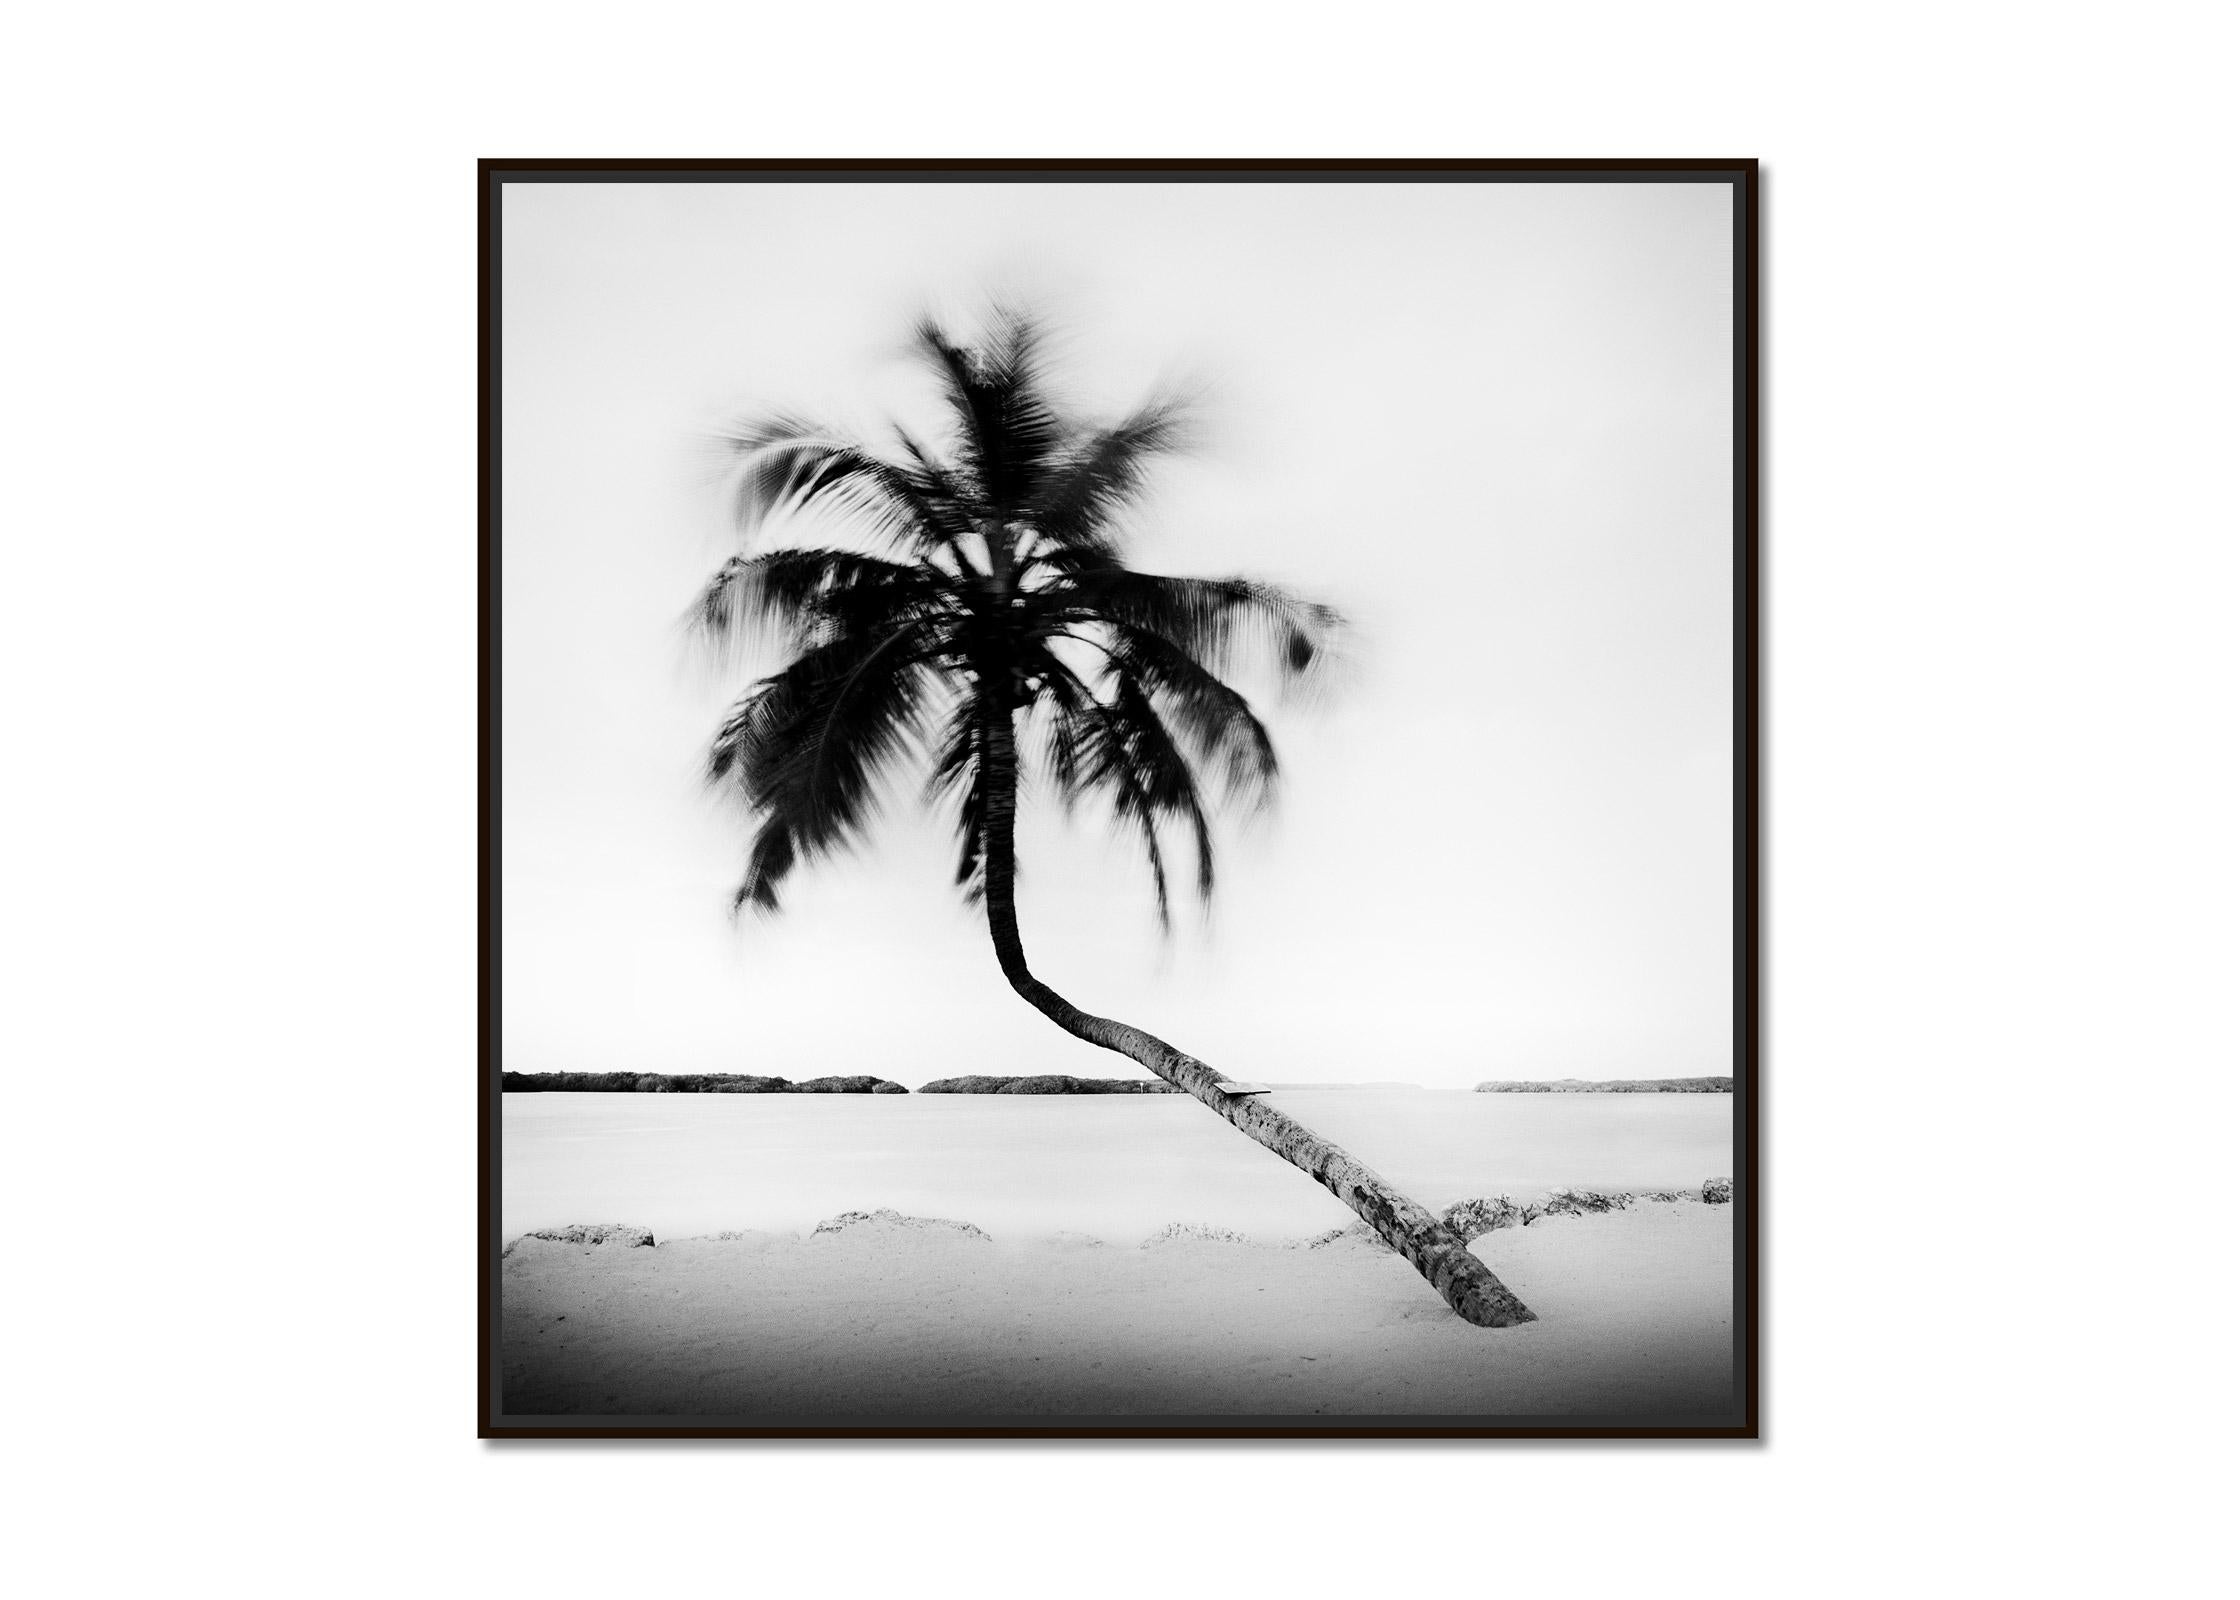 Bent Palm, Beach, Florida, USA, black and white fine art photography, landscape - Photograph by Gerald Berghammer, Ina Forstinger